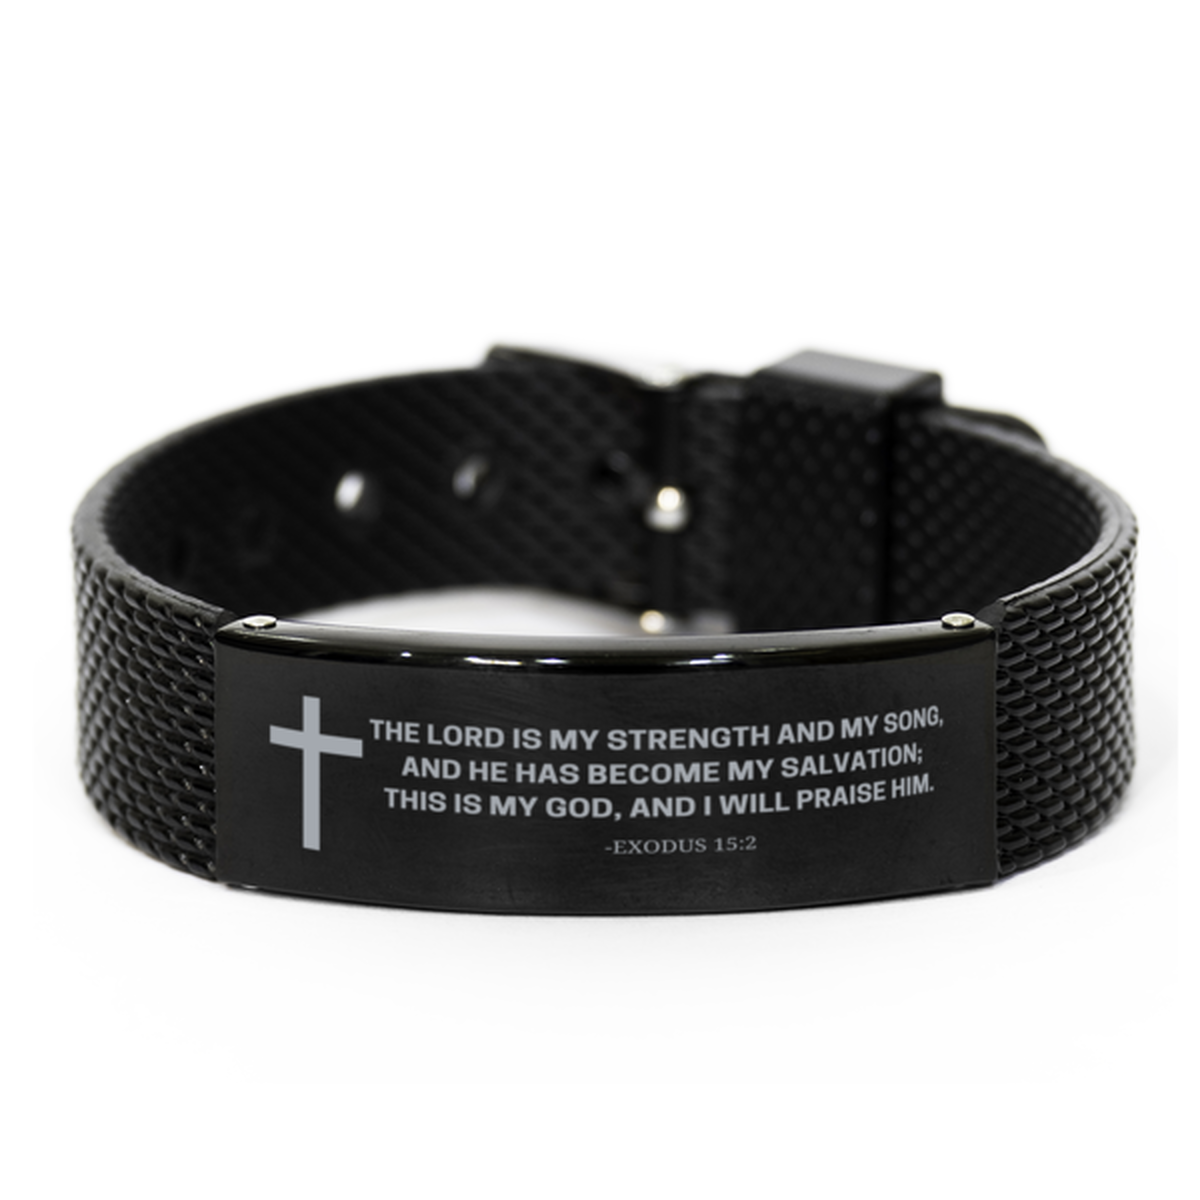 Baptism Gifts For Teenage Boys Girls, Christian Bible Verse Black Shark Mesh Bracelet, The Lord is my strength, Catholic Confirmation Gifts for Son, Godson, Grandson, Nephew